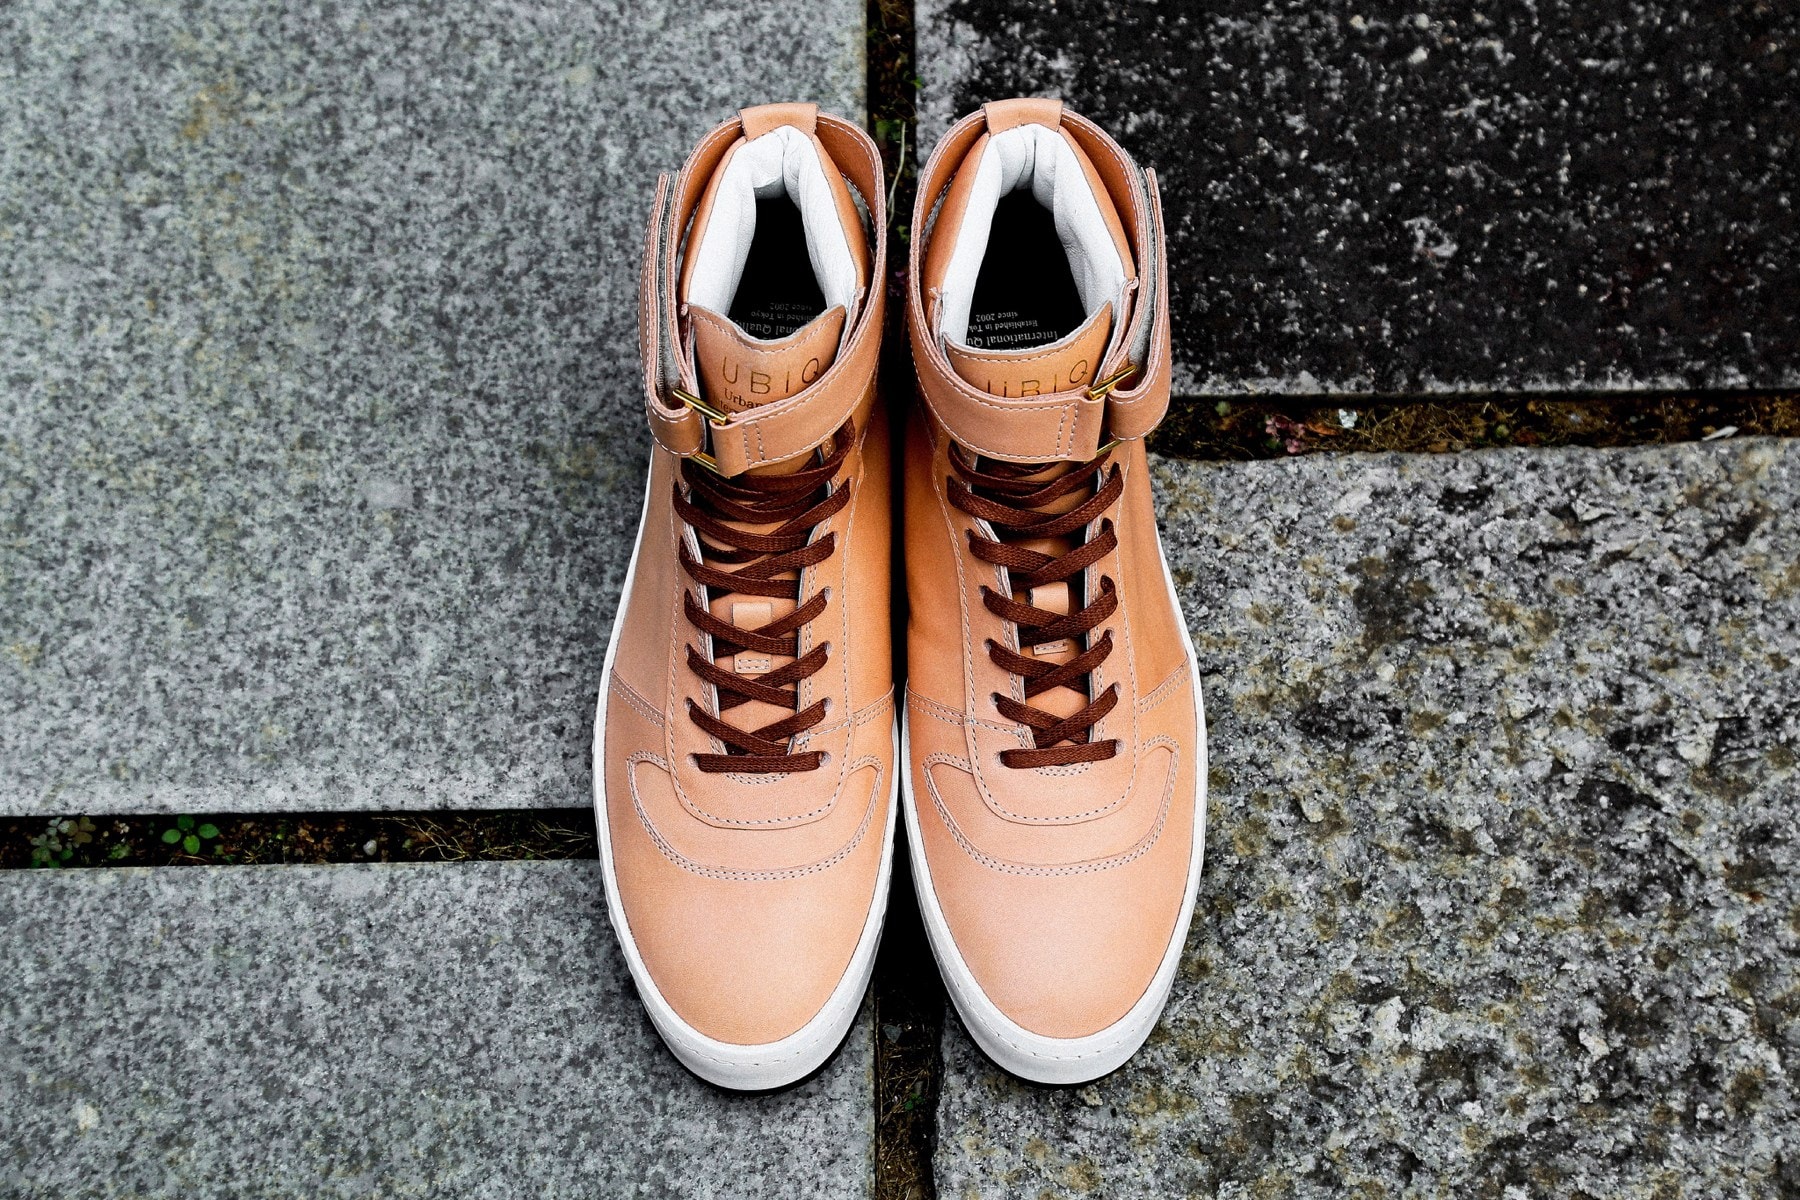 UBIQ MADE in JAPAN Series Introduces VAGET J beige natural black tan leather suede sneakers boots